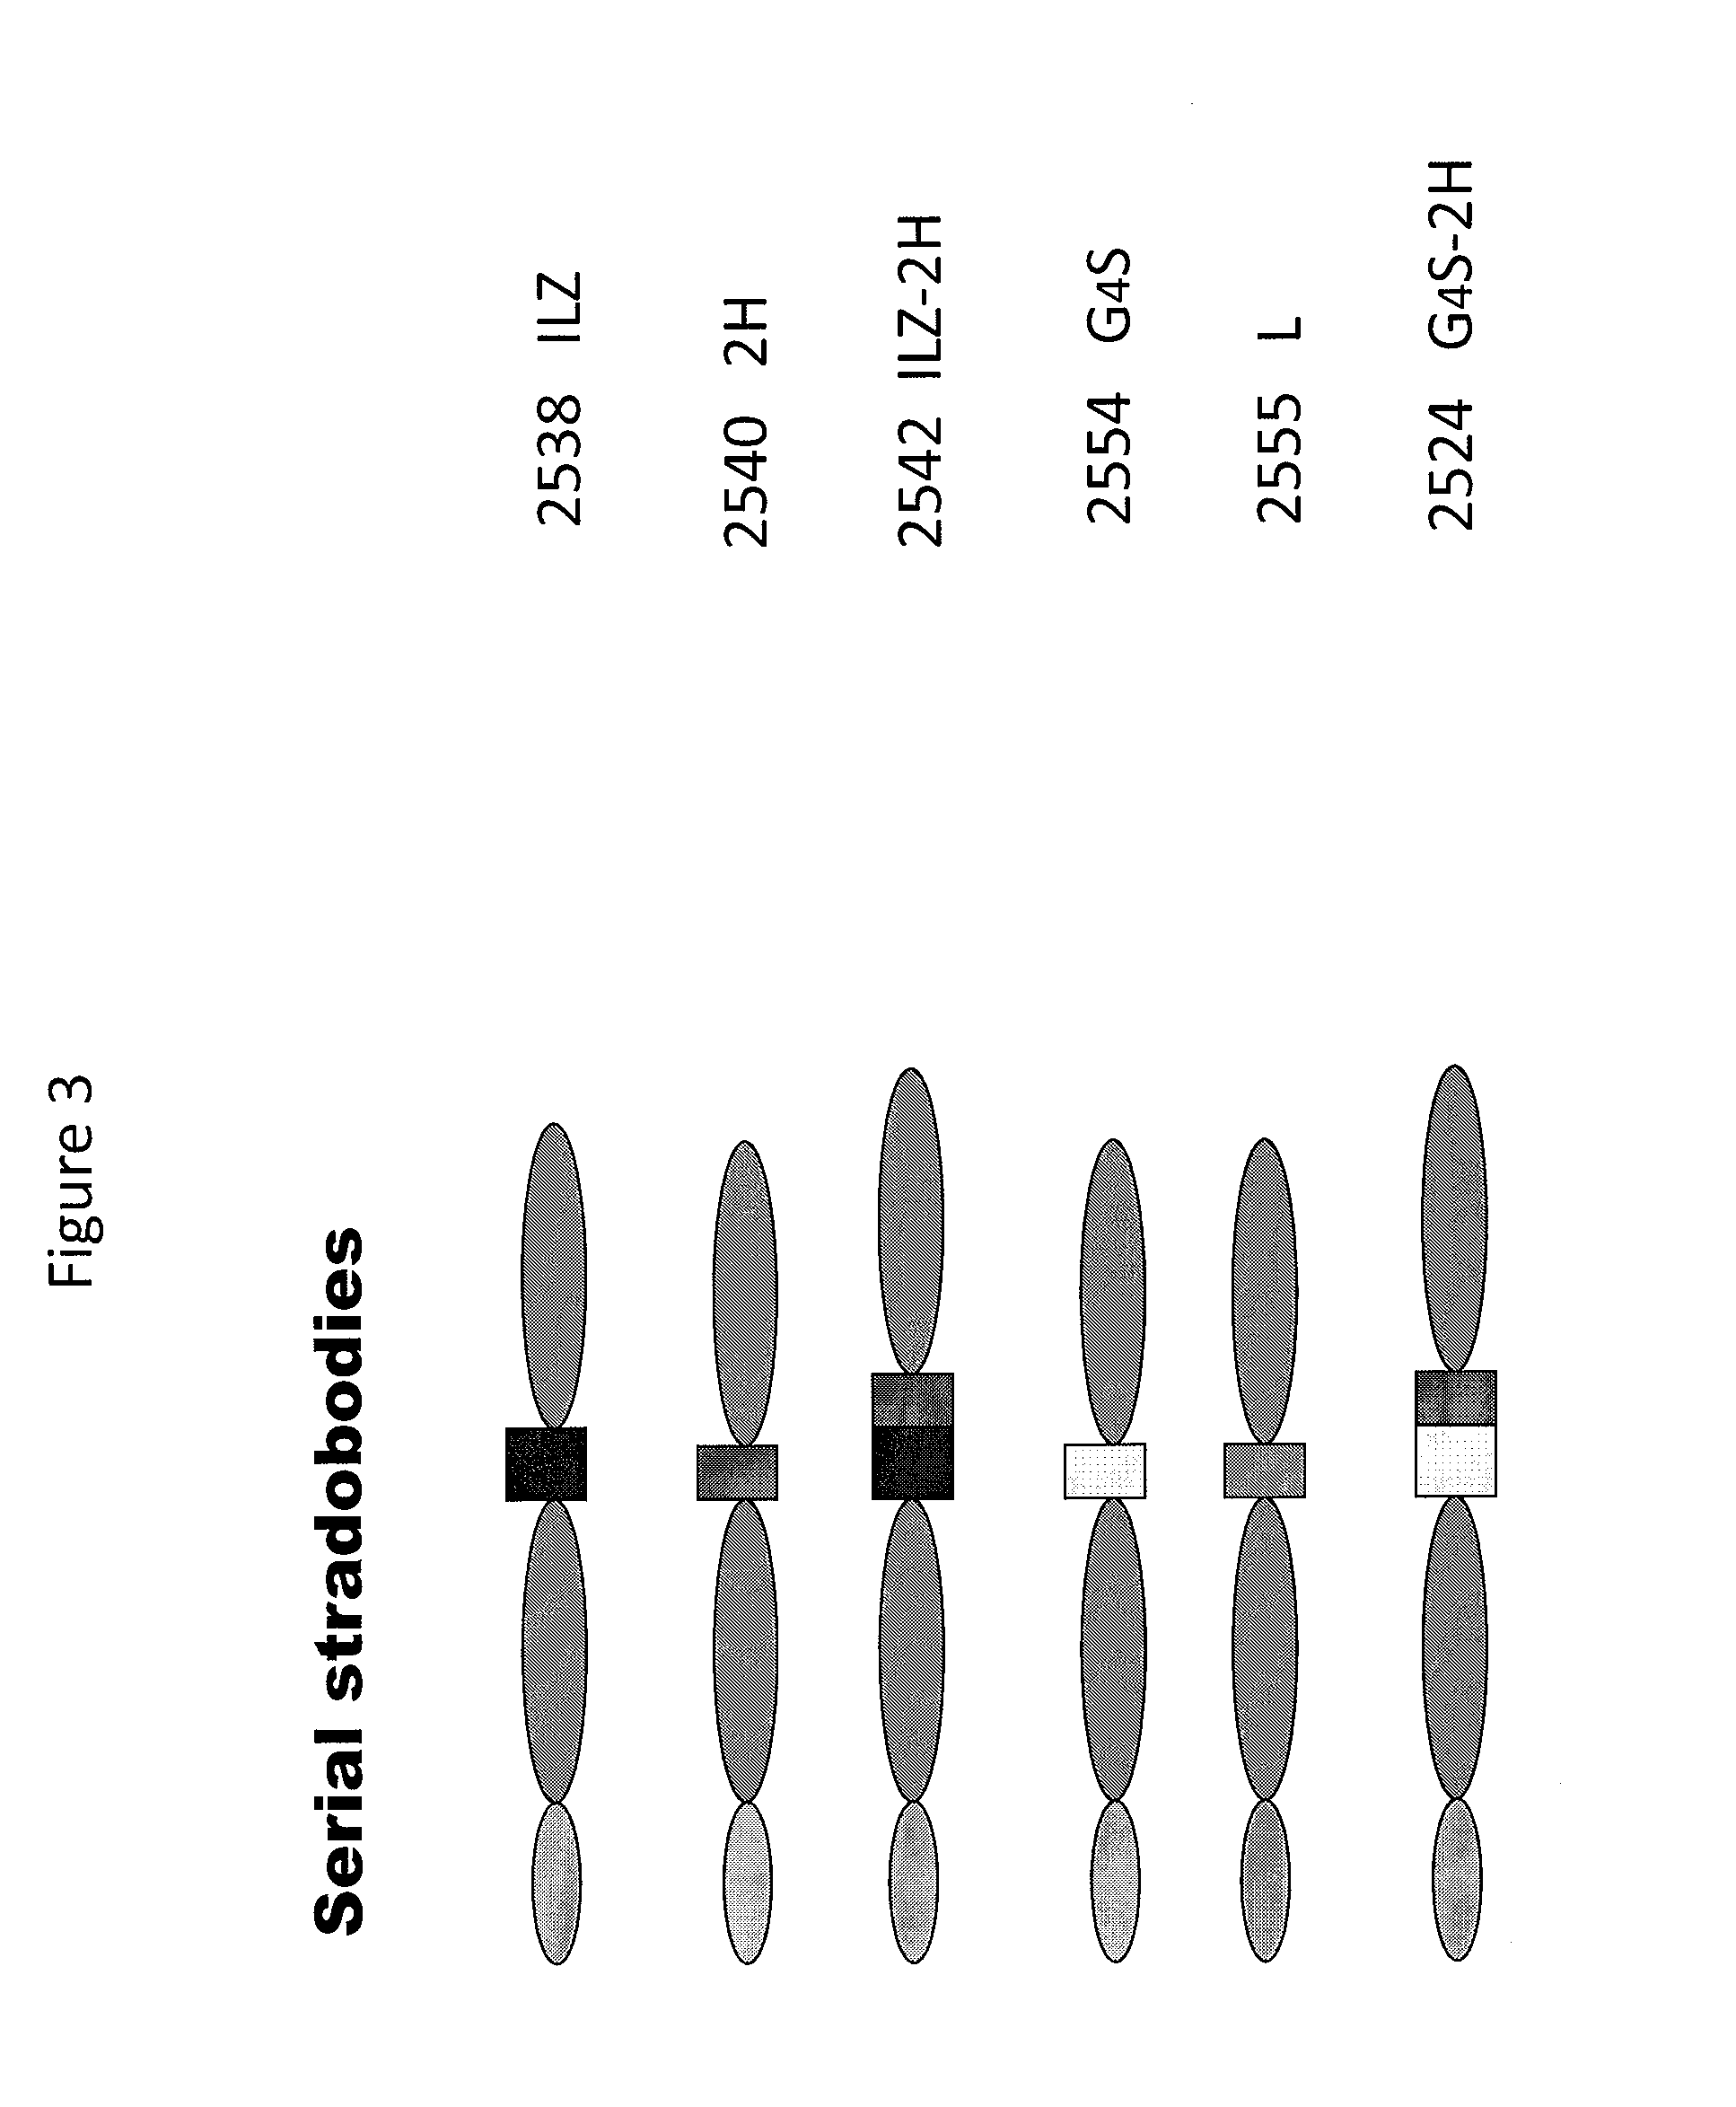 Molecules with antigen binding and polyvalent fc gamma receptor binding activity